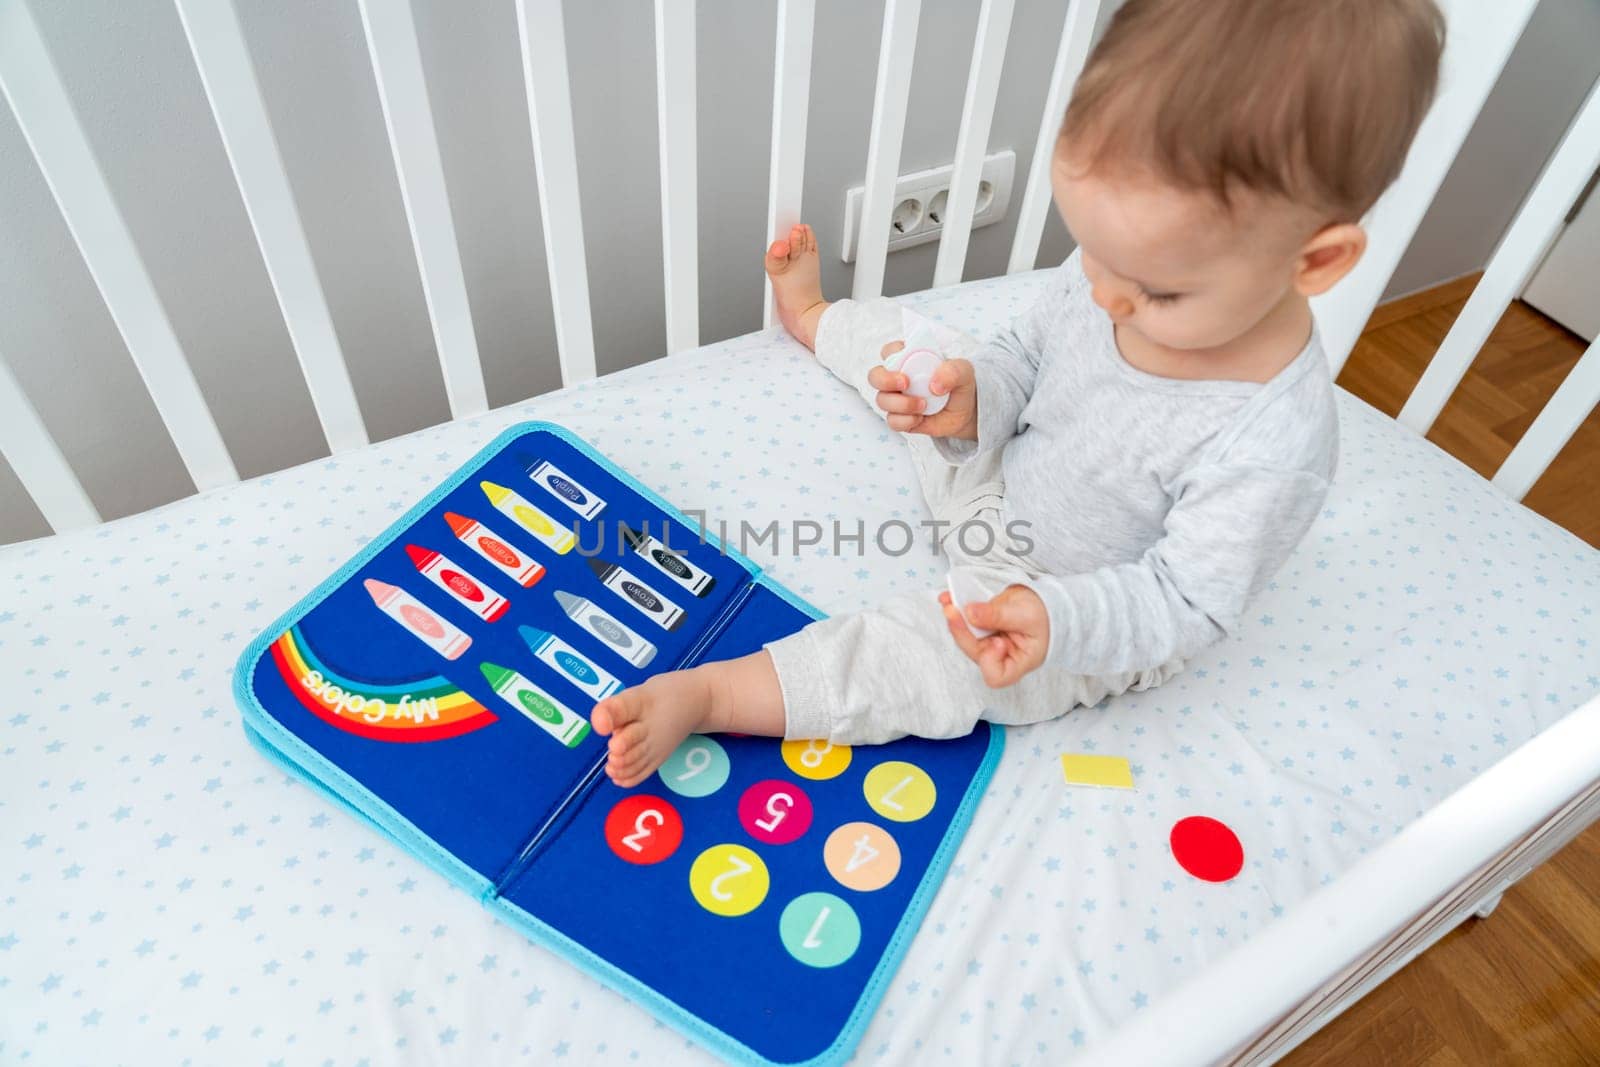 Baby playing with busy book sitting in crib. Concept of smart books and modern toys by Mariakray